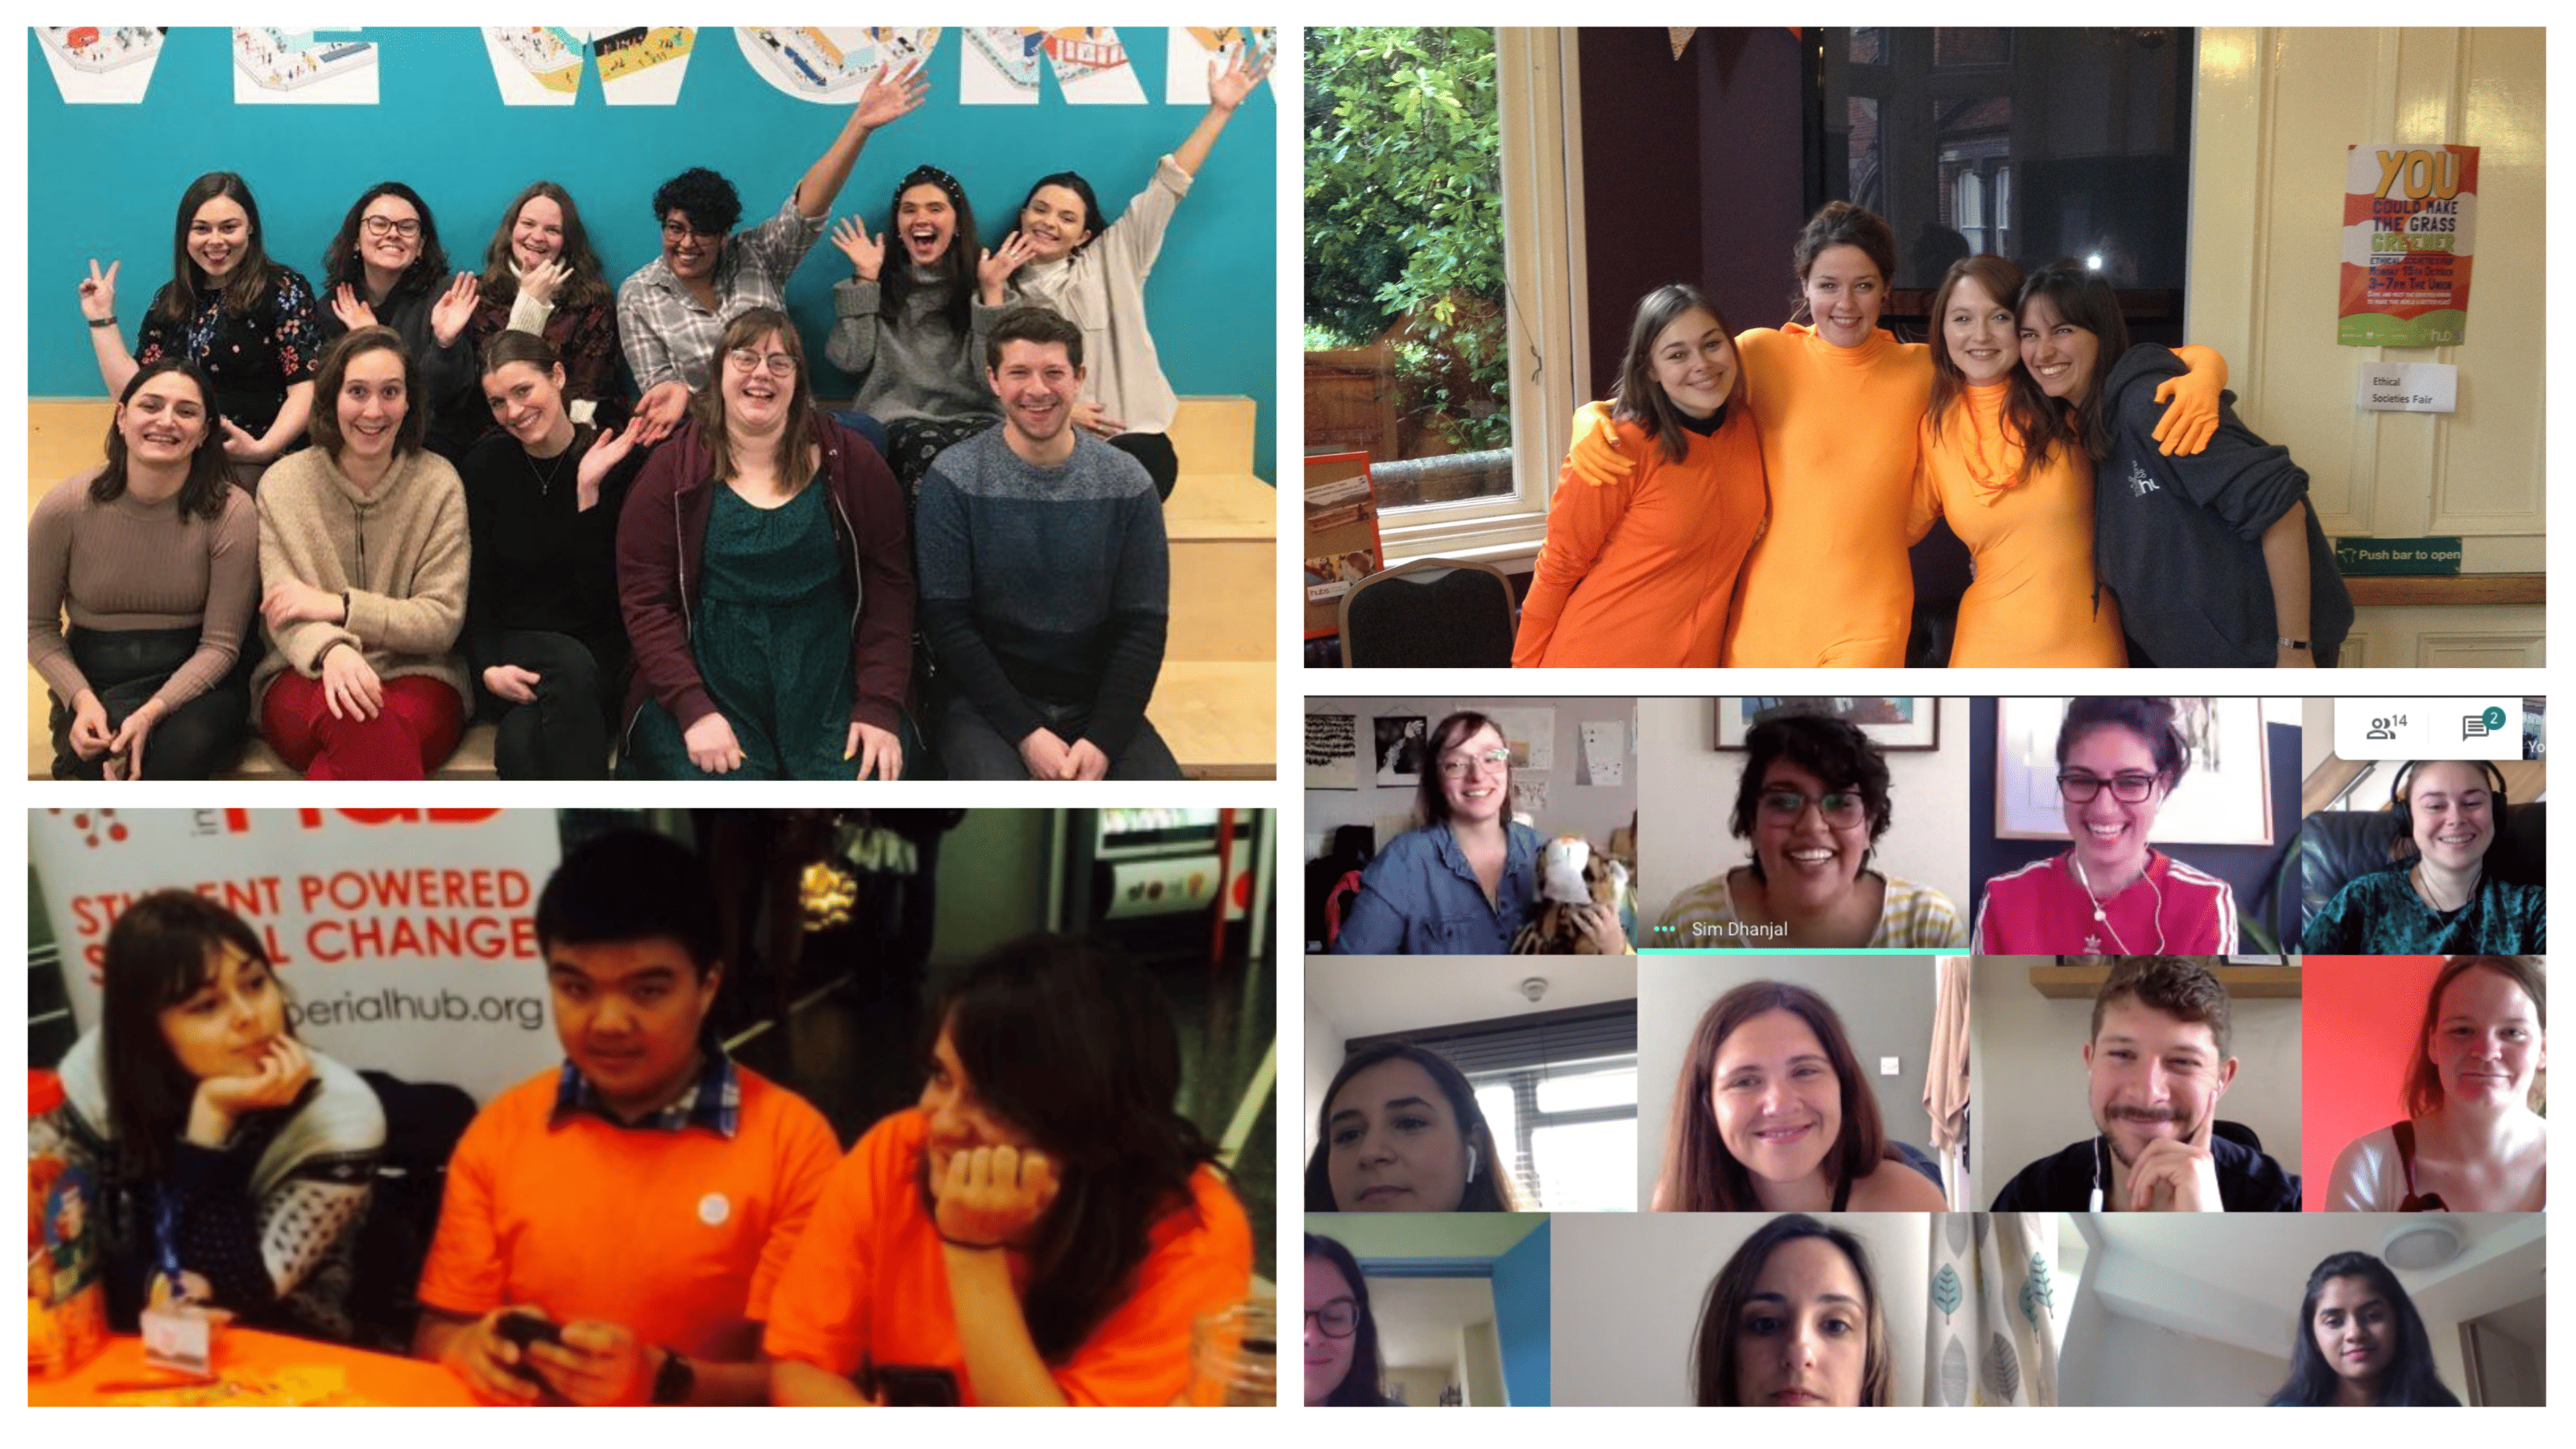 Four images in a collage format. One image is members of the Student Hubs staff team with their hands in the air, another is four members of staff in orange dress with their arms around one another, another image is of three students sitting at an information stall wearing orange and the last is a screenshot of the staff team on a google hangouts call smiling.